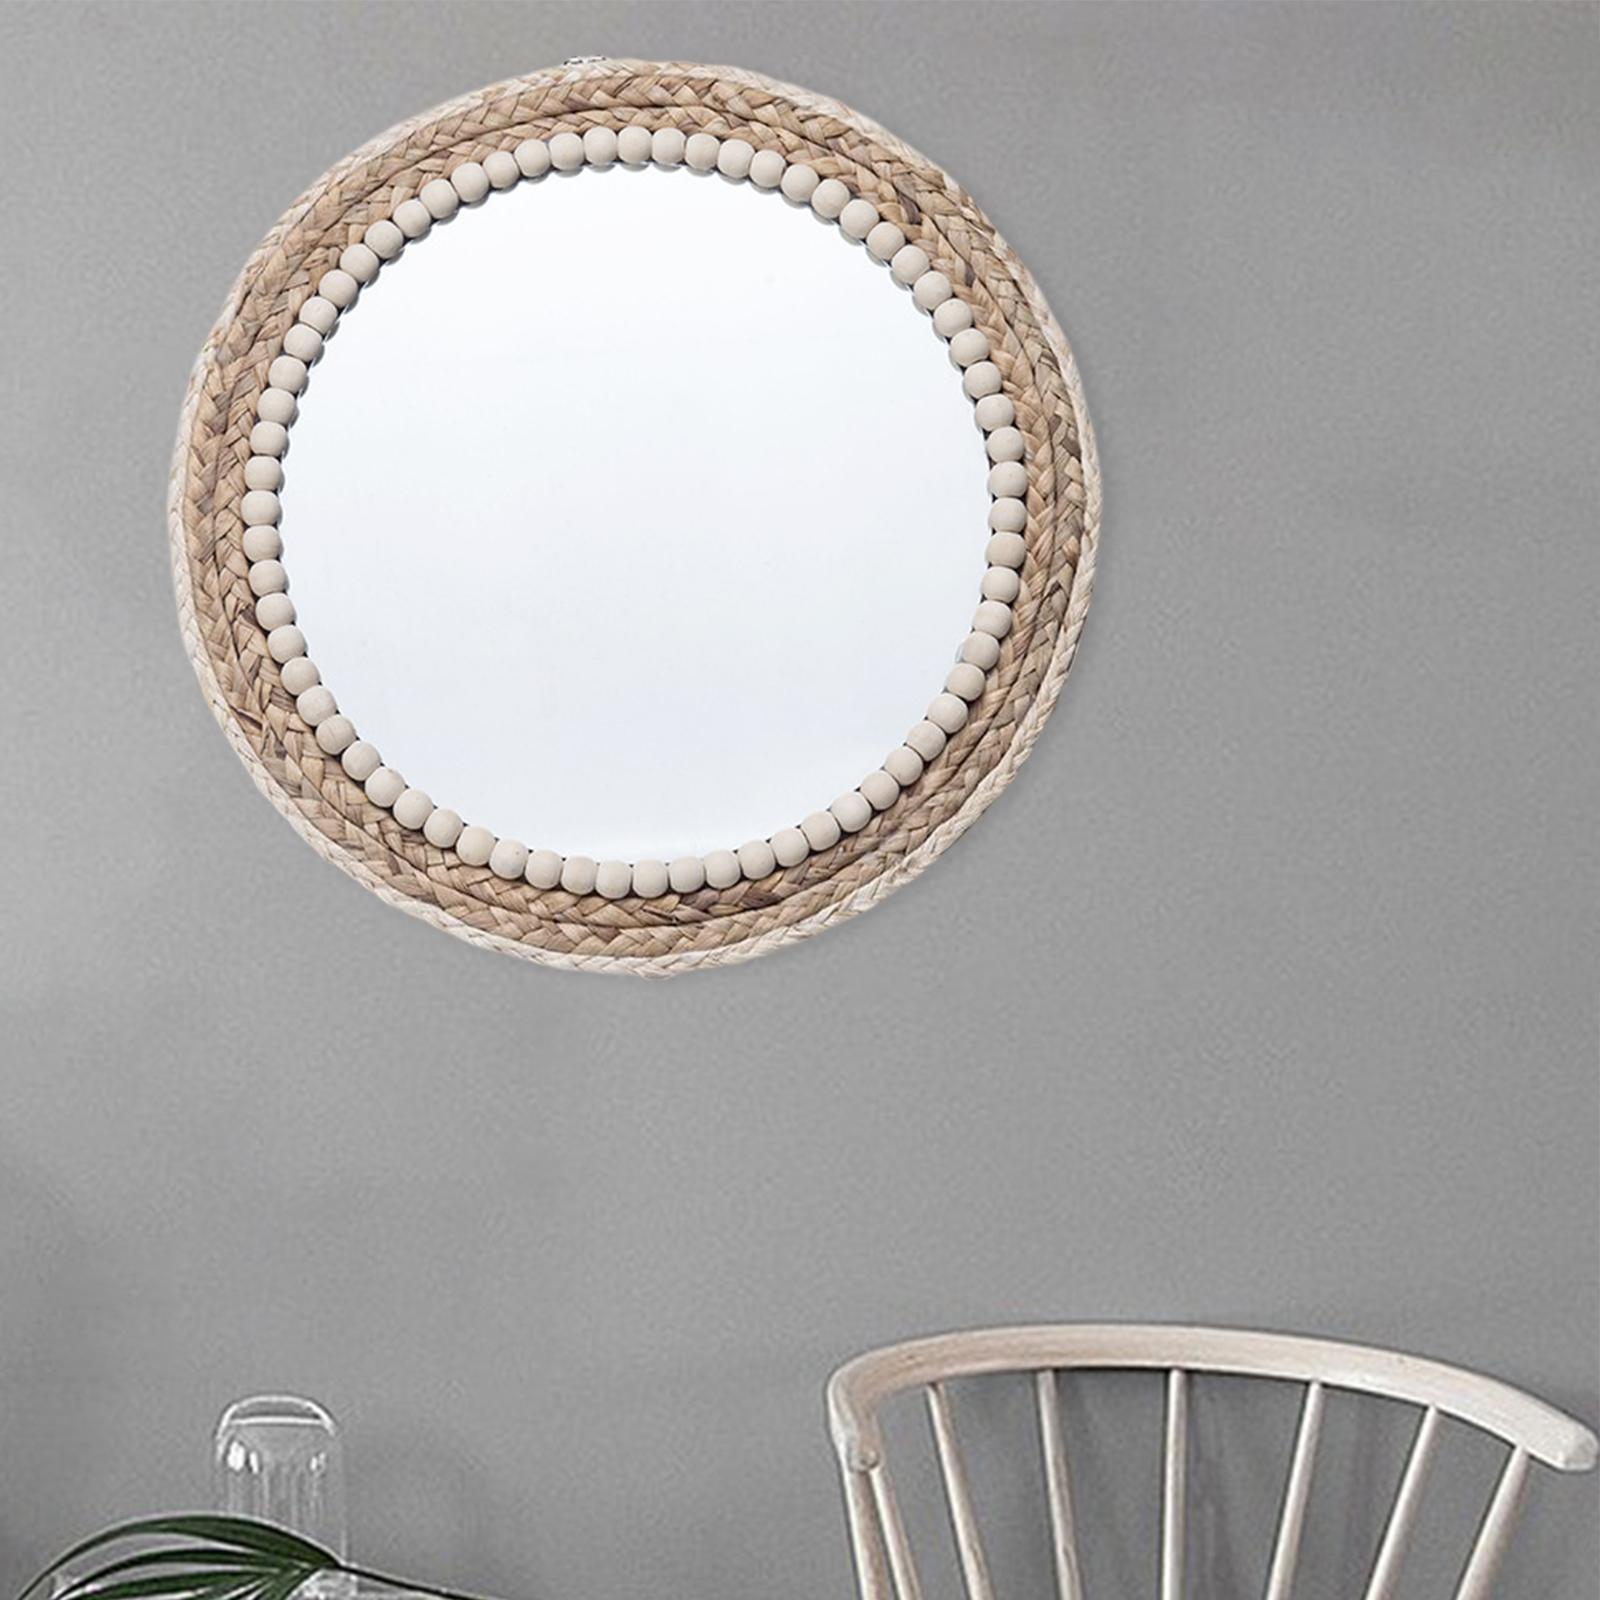 Round Mirror Straw Rope Hanging Wall Mirror for Apartment Decor